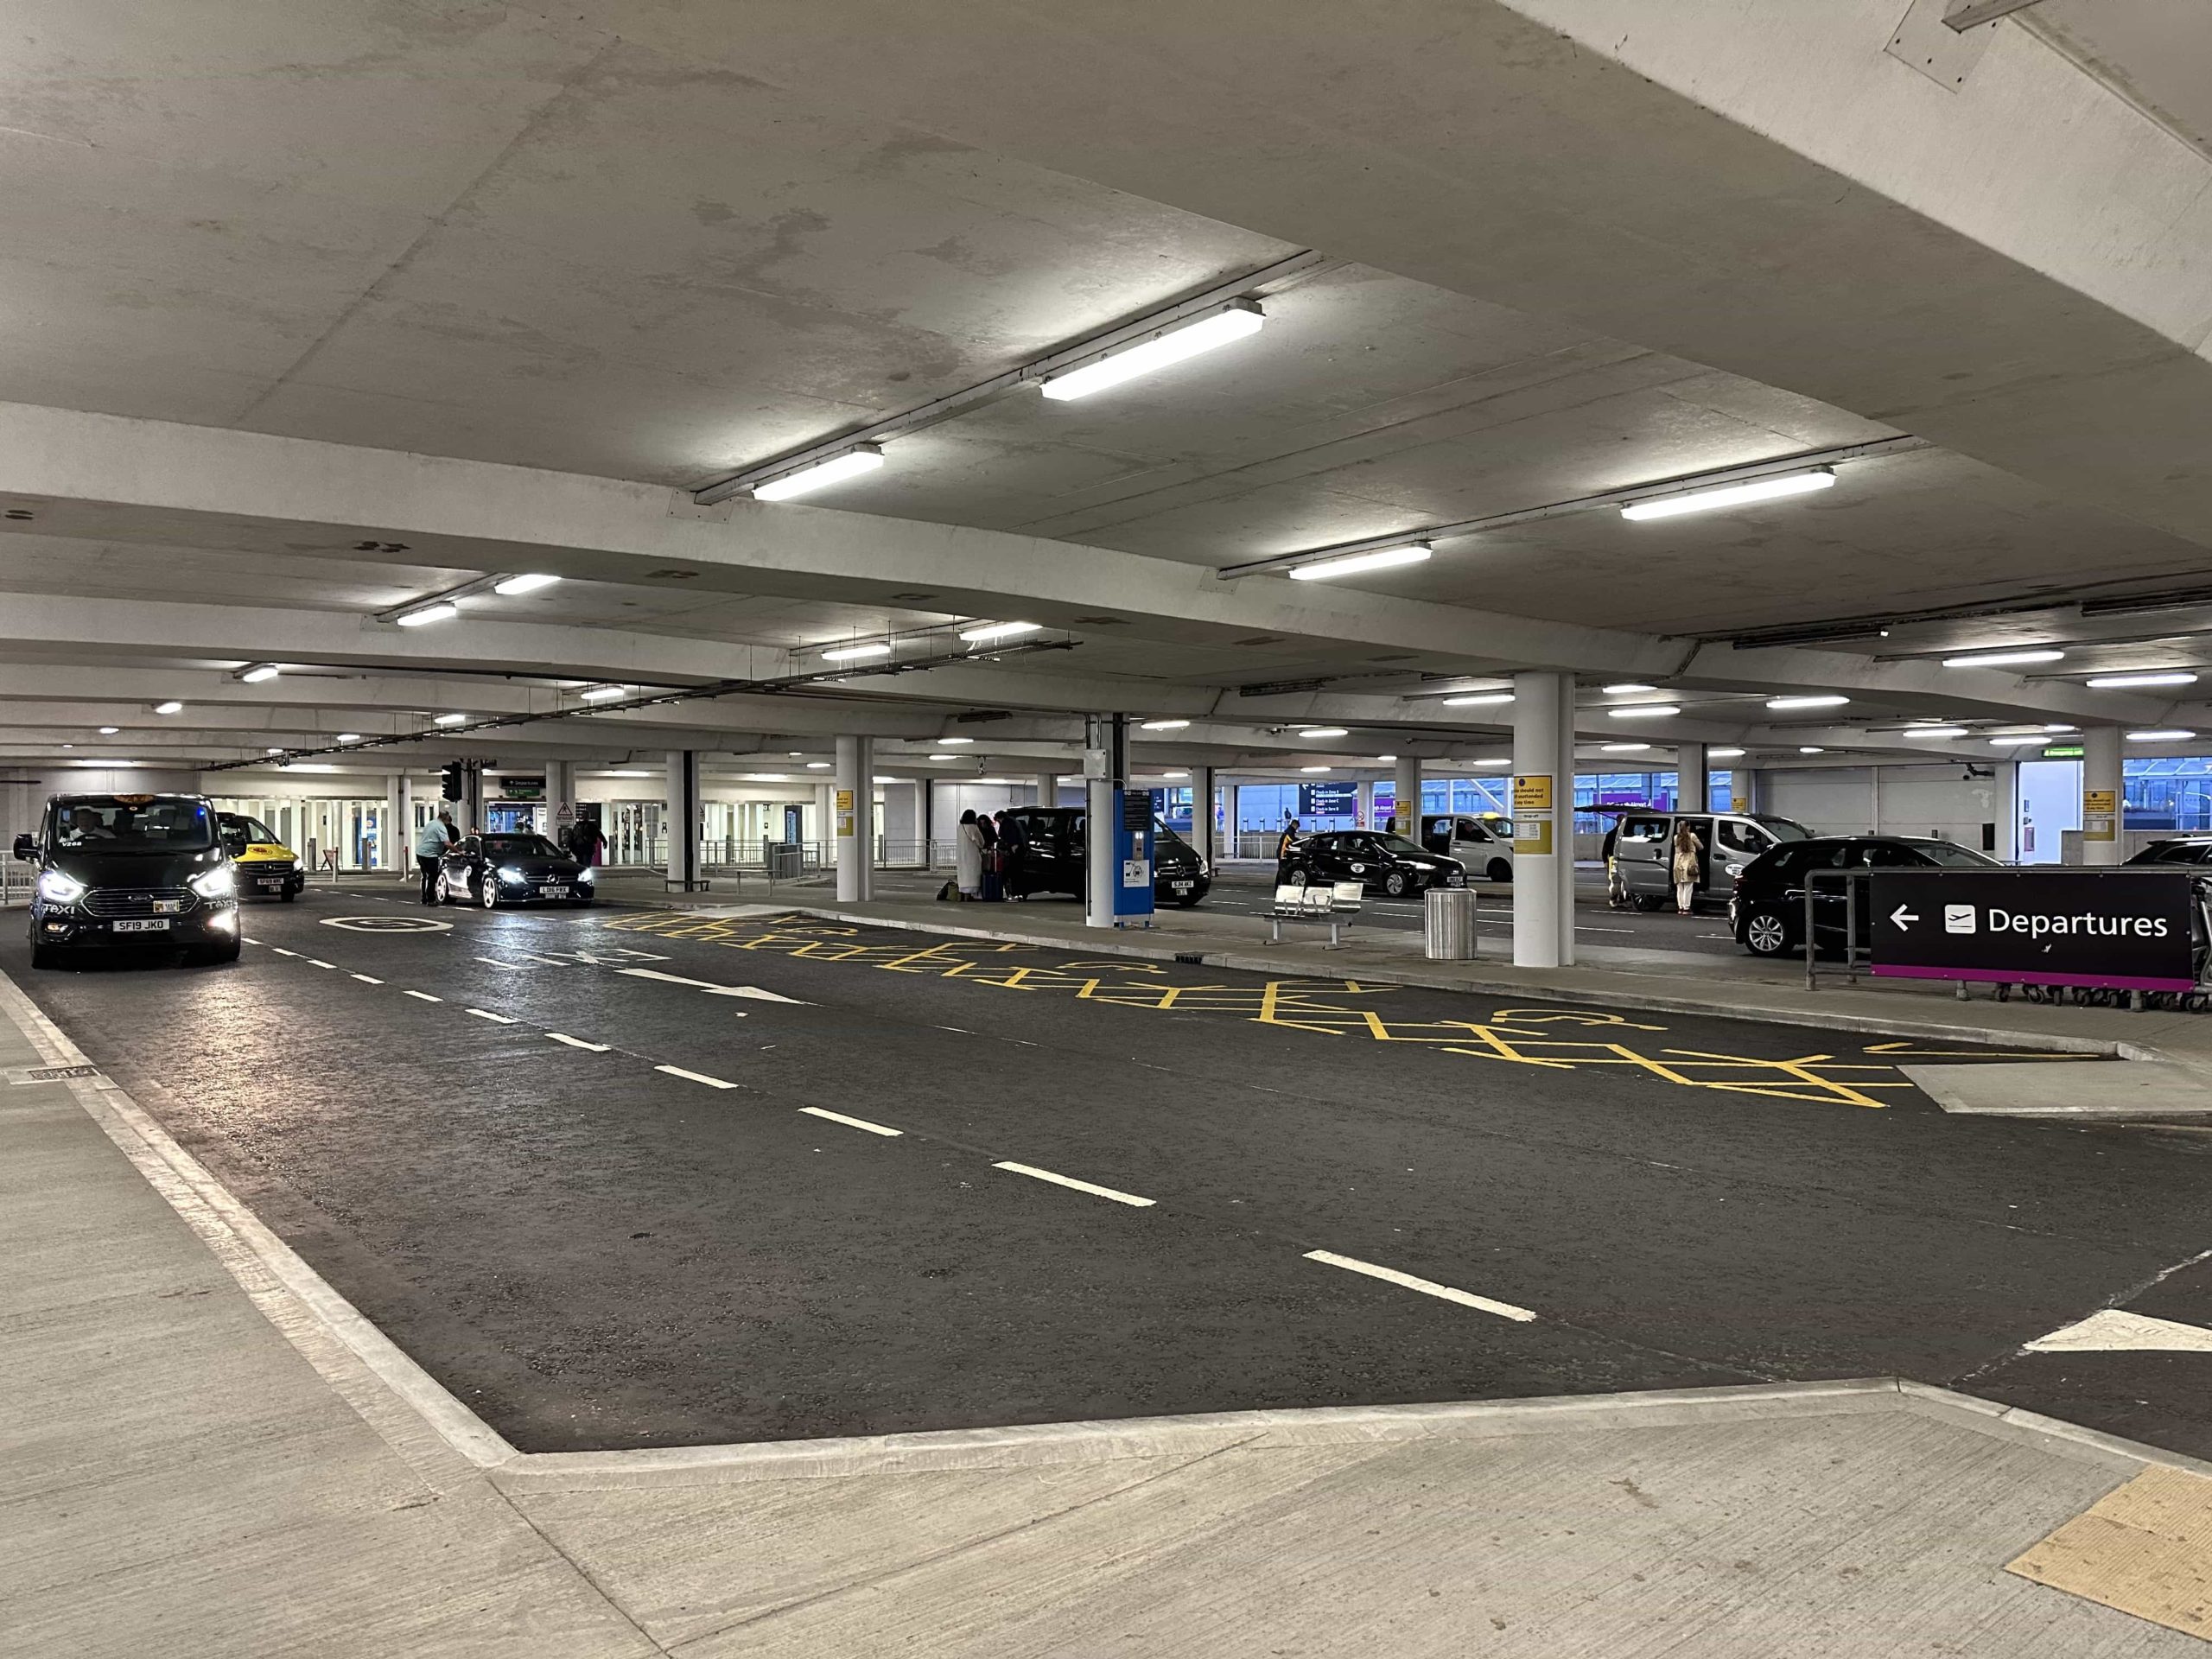 Lanes of parking bays with taxis and cars pulling up to drop people off